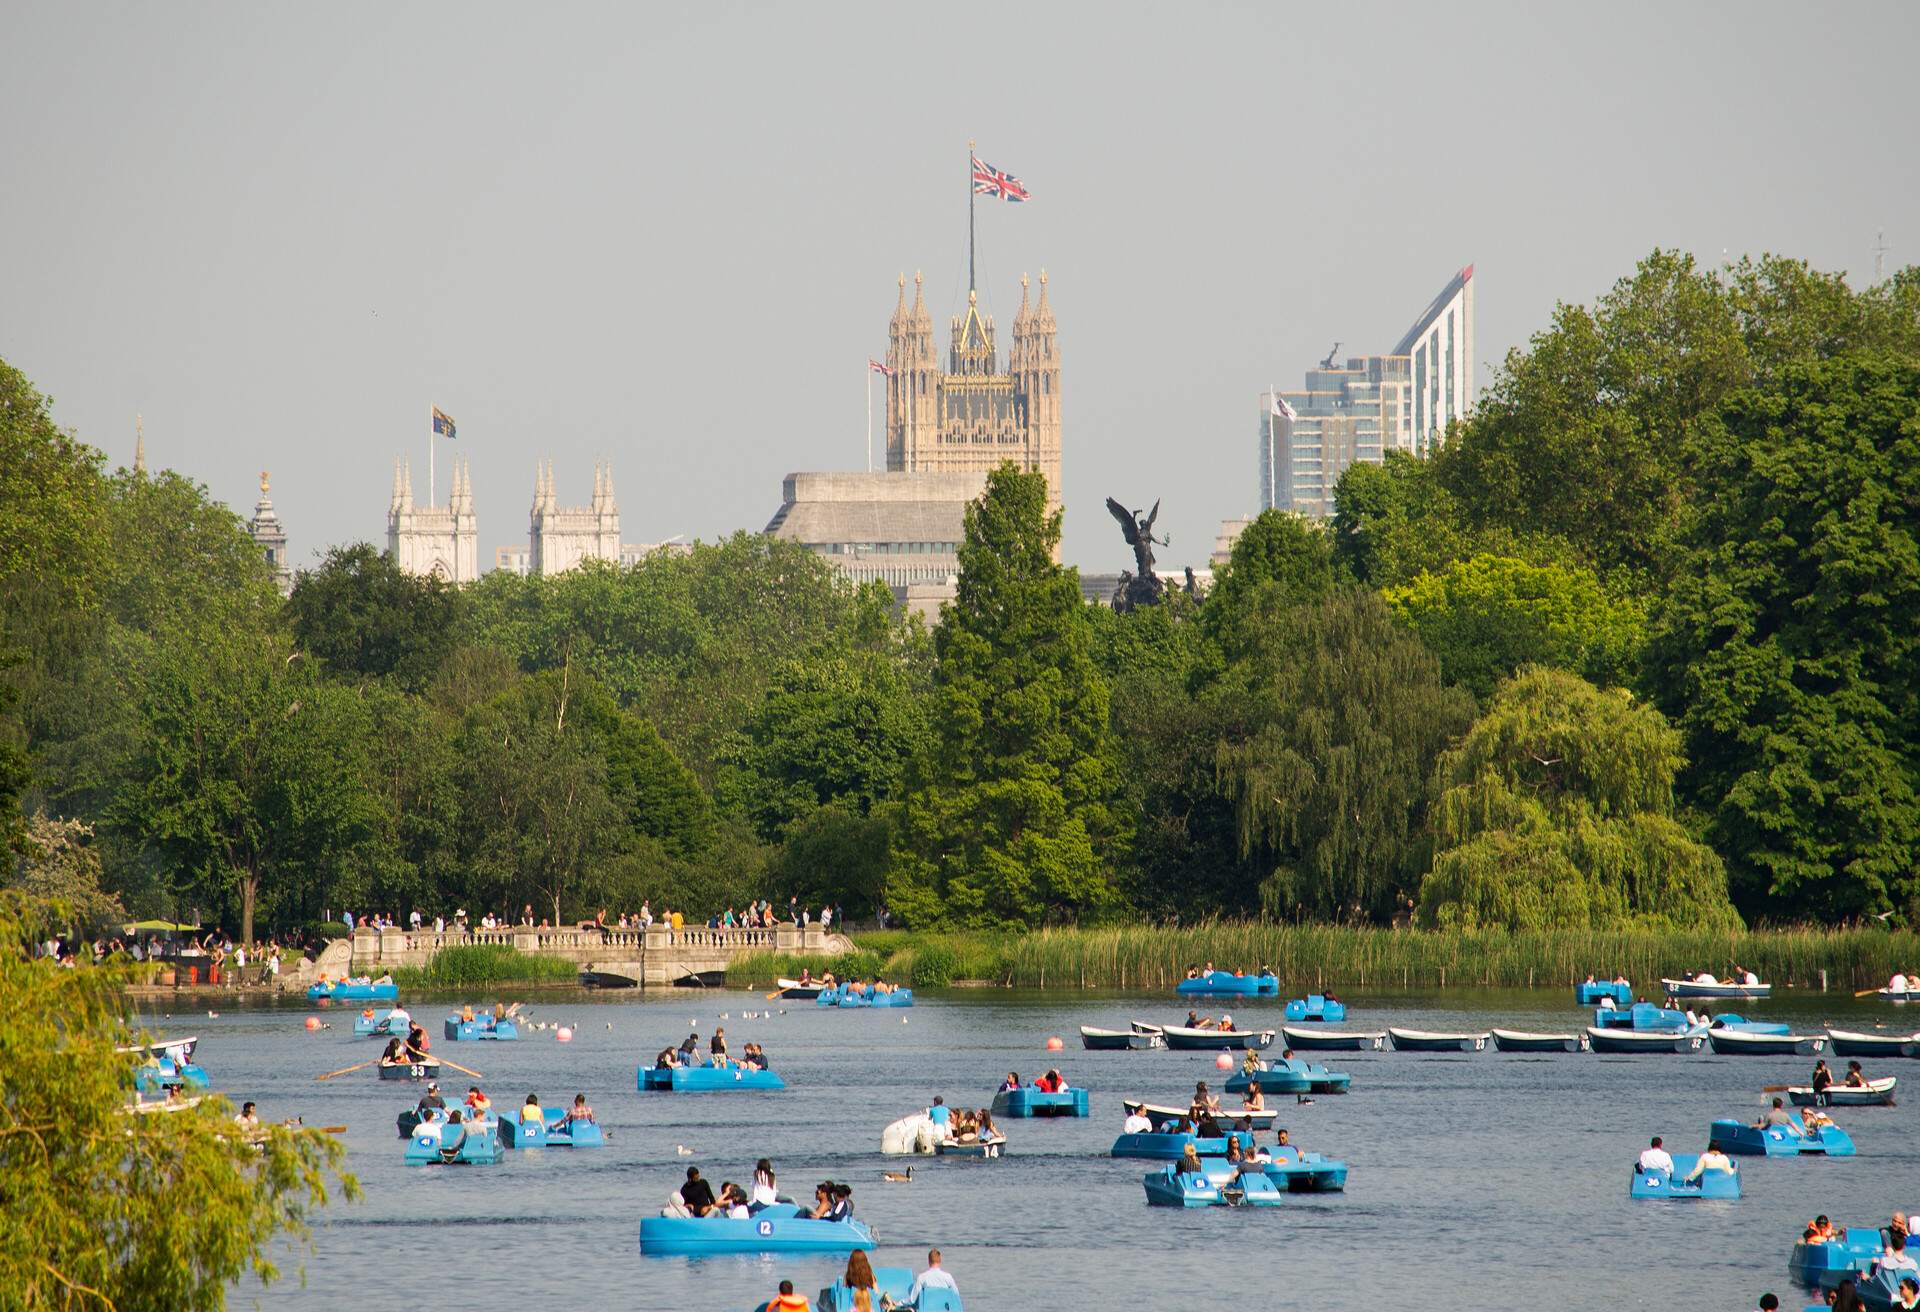 A crowd of people on blue boats in a lake lined with tall green trees with a view of the palace Westminster tower with a flag of United Kindom.